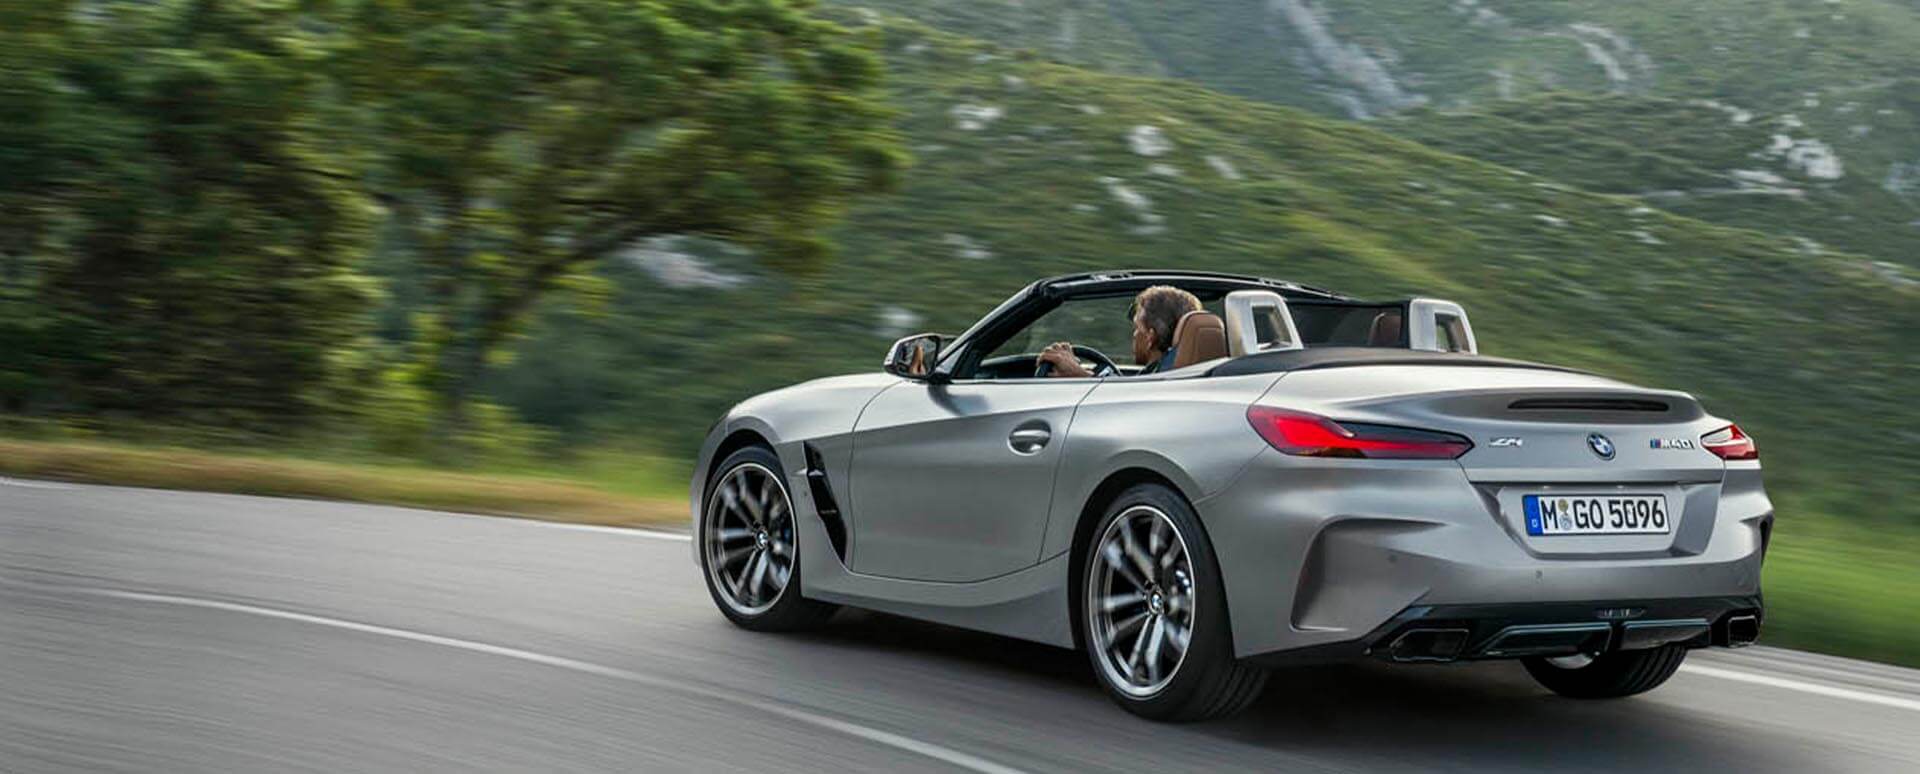 Grey BMW Z4 M40i driving in the countryside with the roof retracted